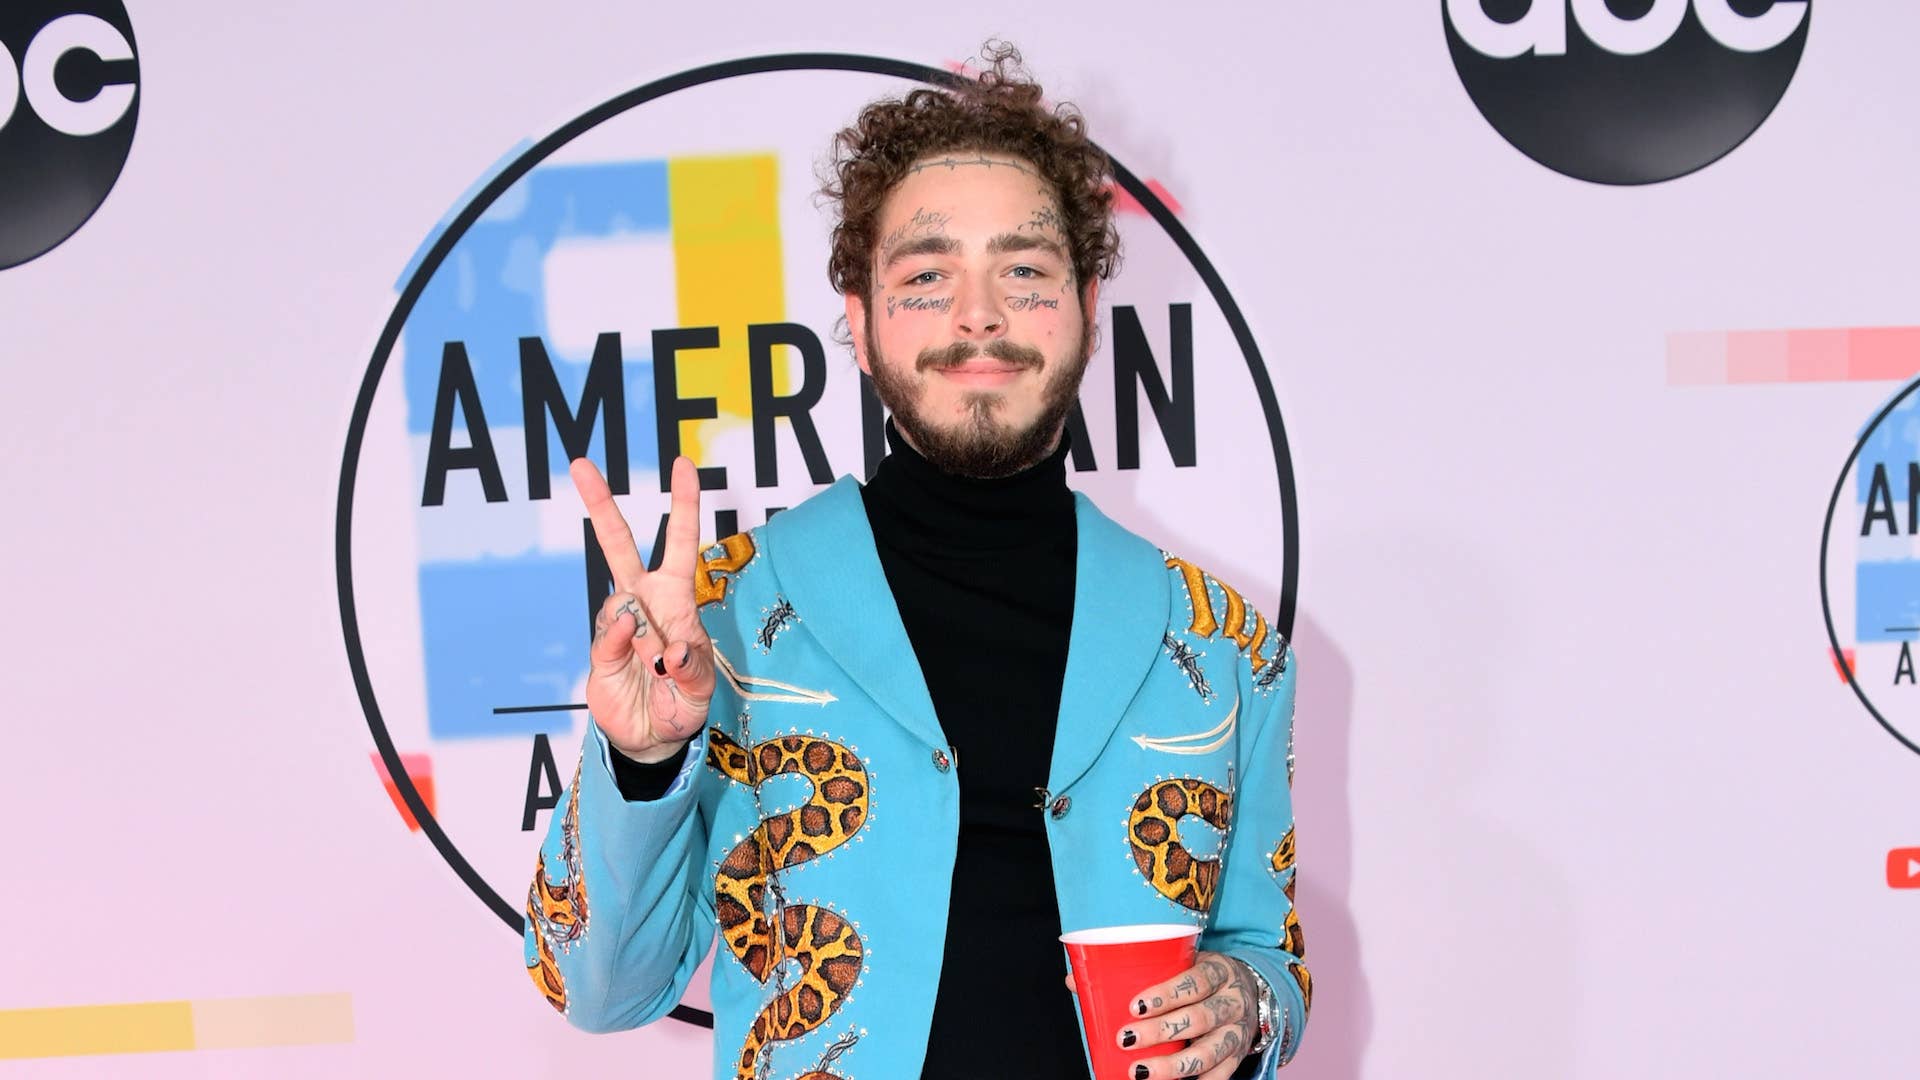 Post Malone attends the 2018 American Music Awards at Microsoft Theate